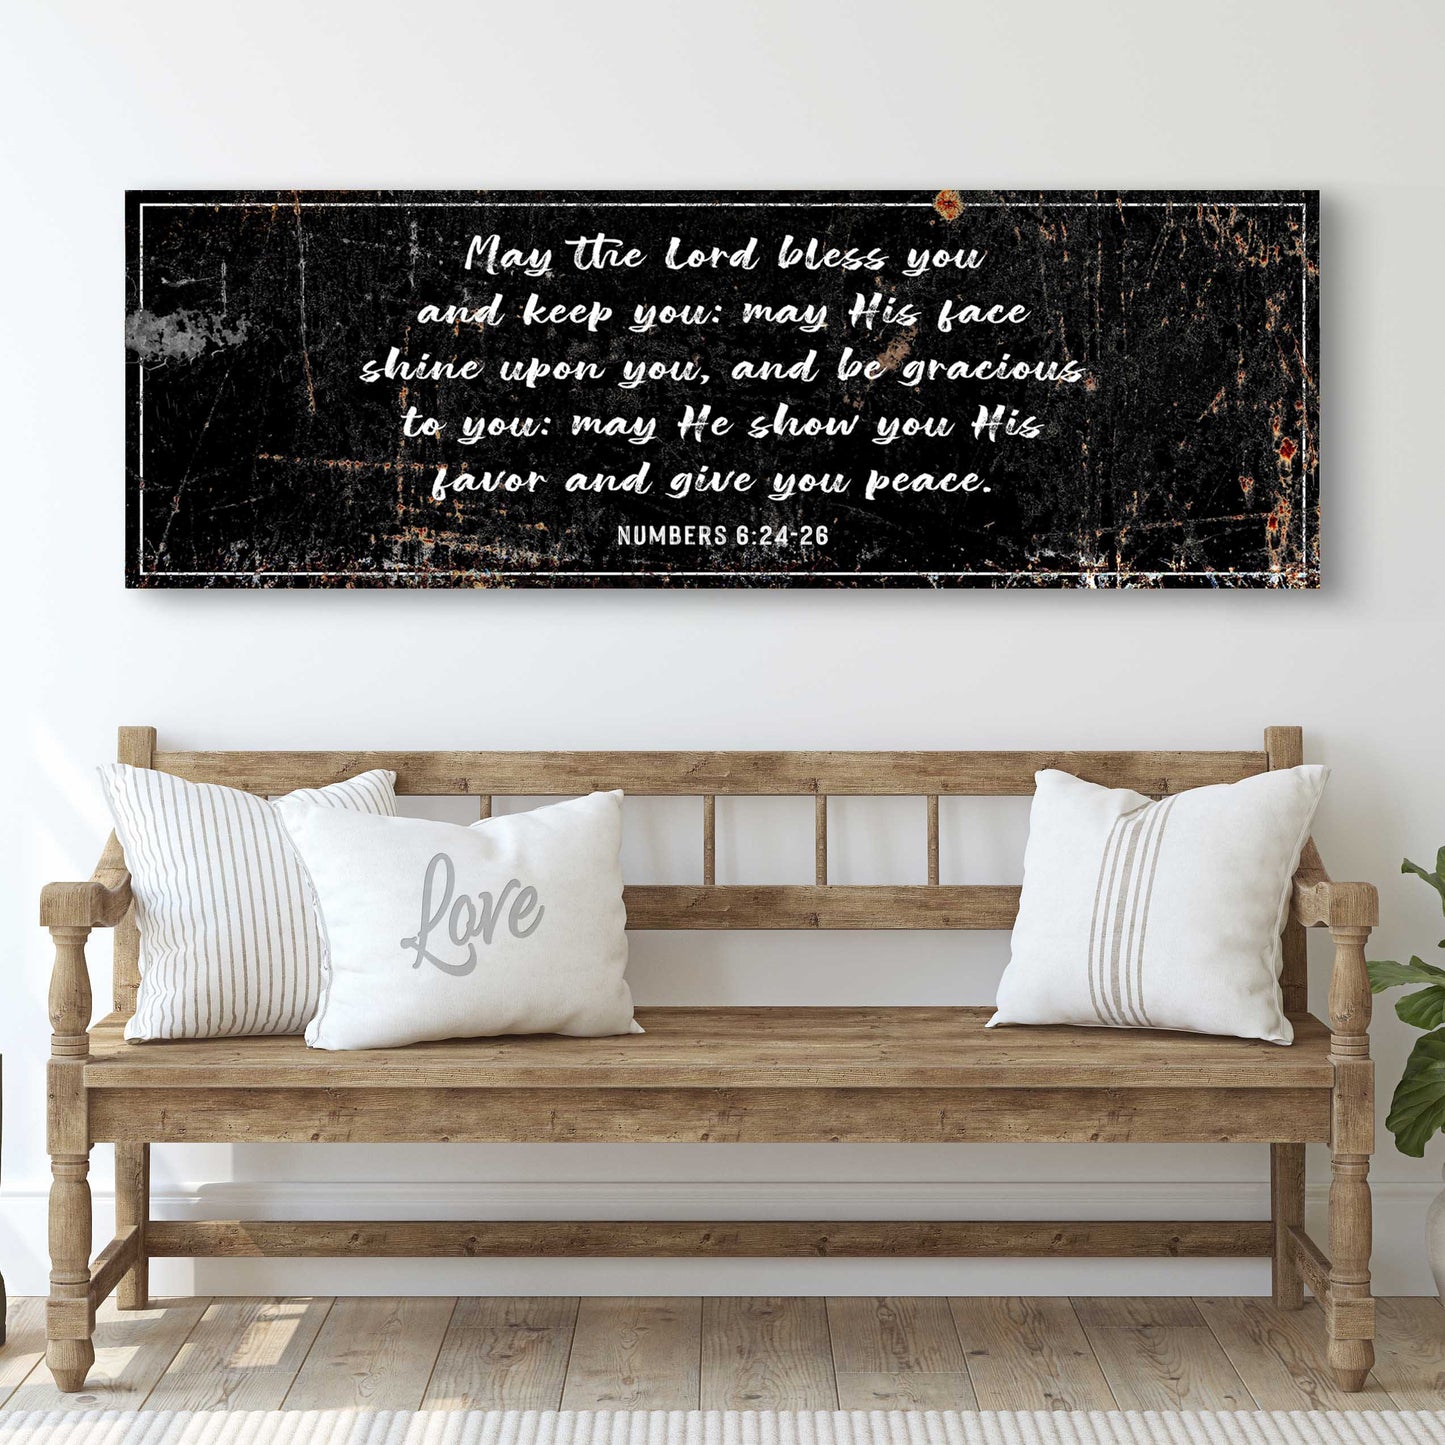 Numbers 6:24-26: 'May The Lord Bless You' Sign - Rustic Christian Wall Art for living room, faith decor